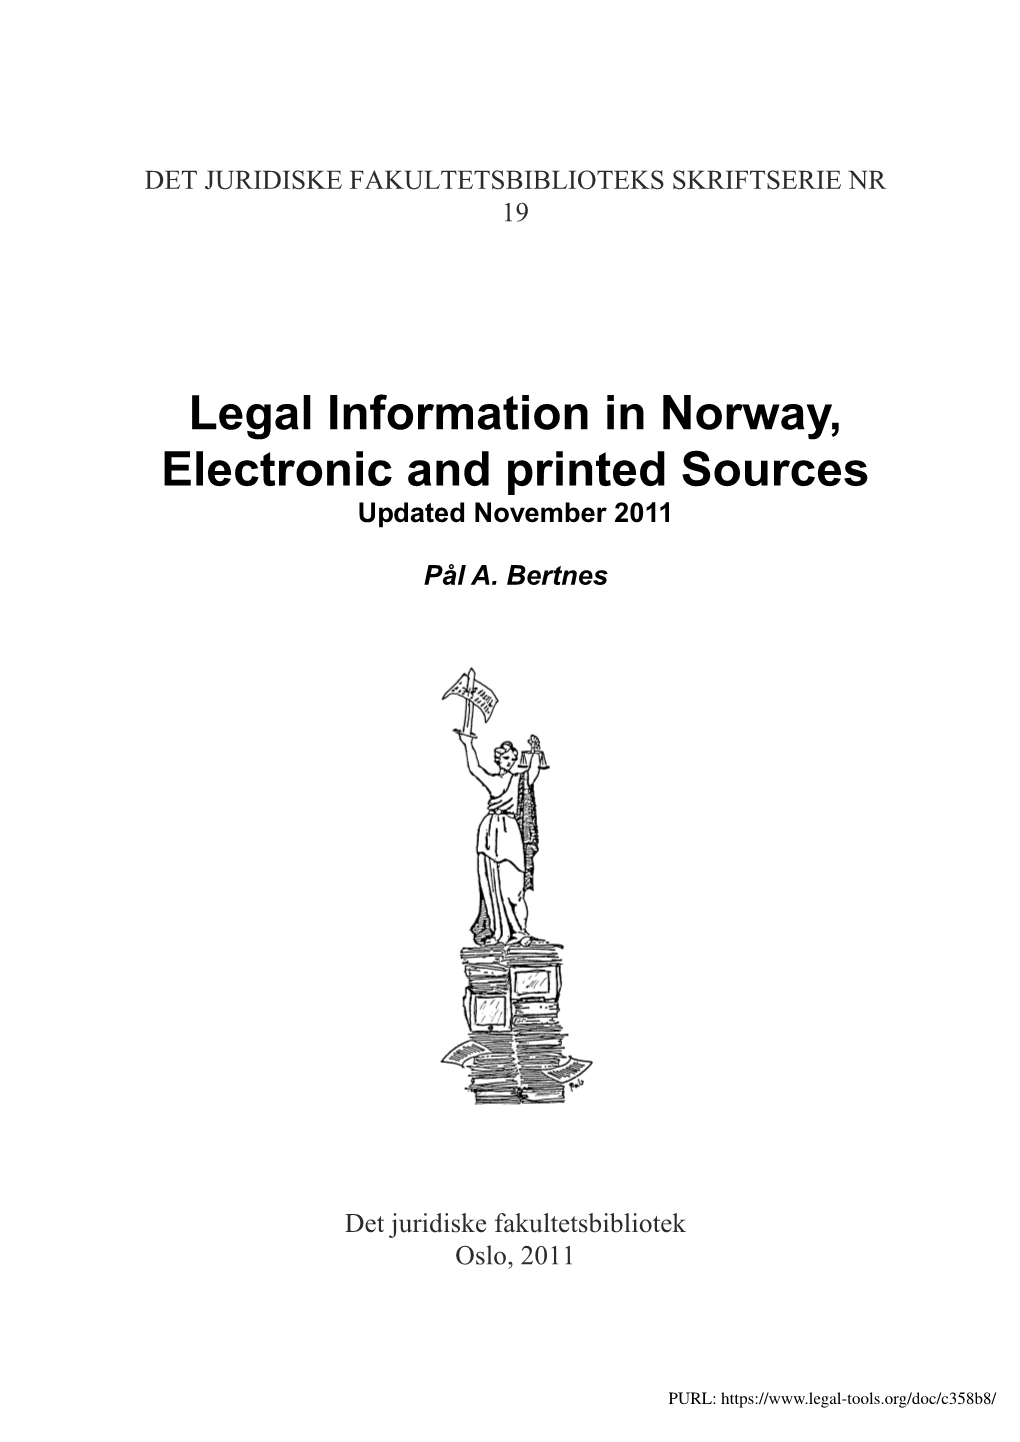 Legal Information in Norway, Electronic and Printed Sources Updated November 2011